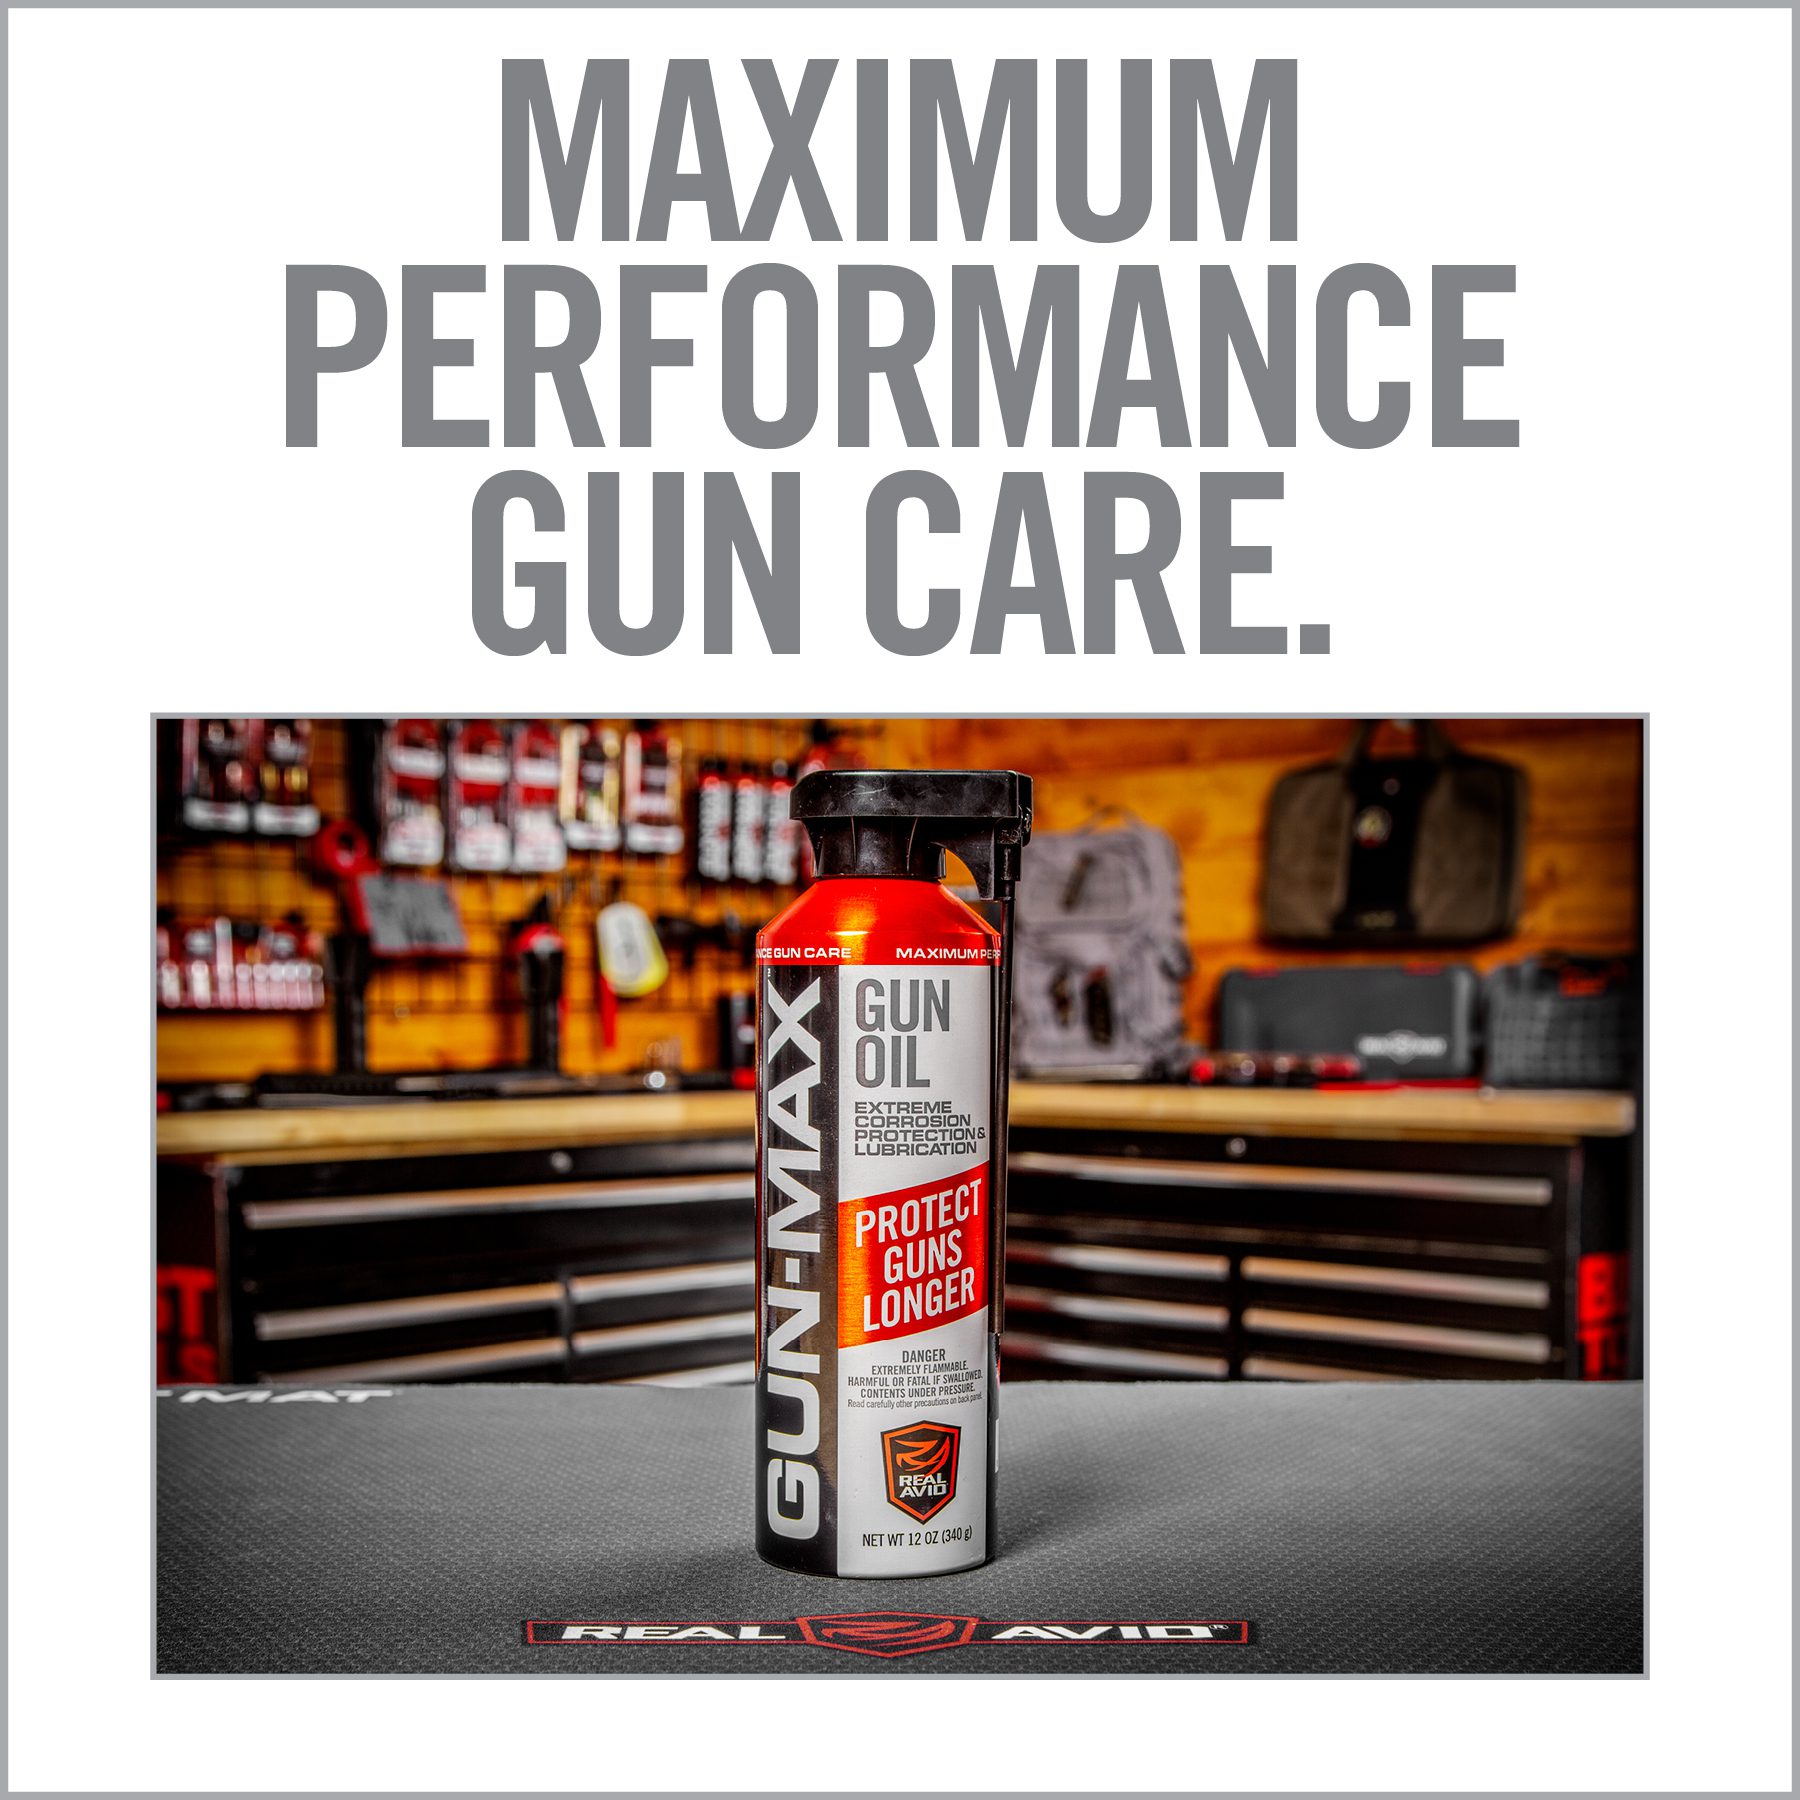 an ad for gun care is shown in this advertisement